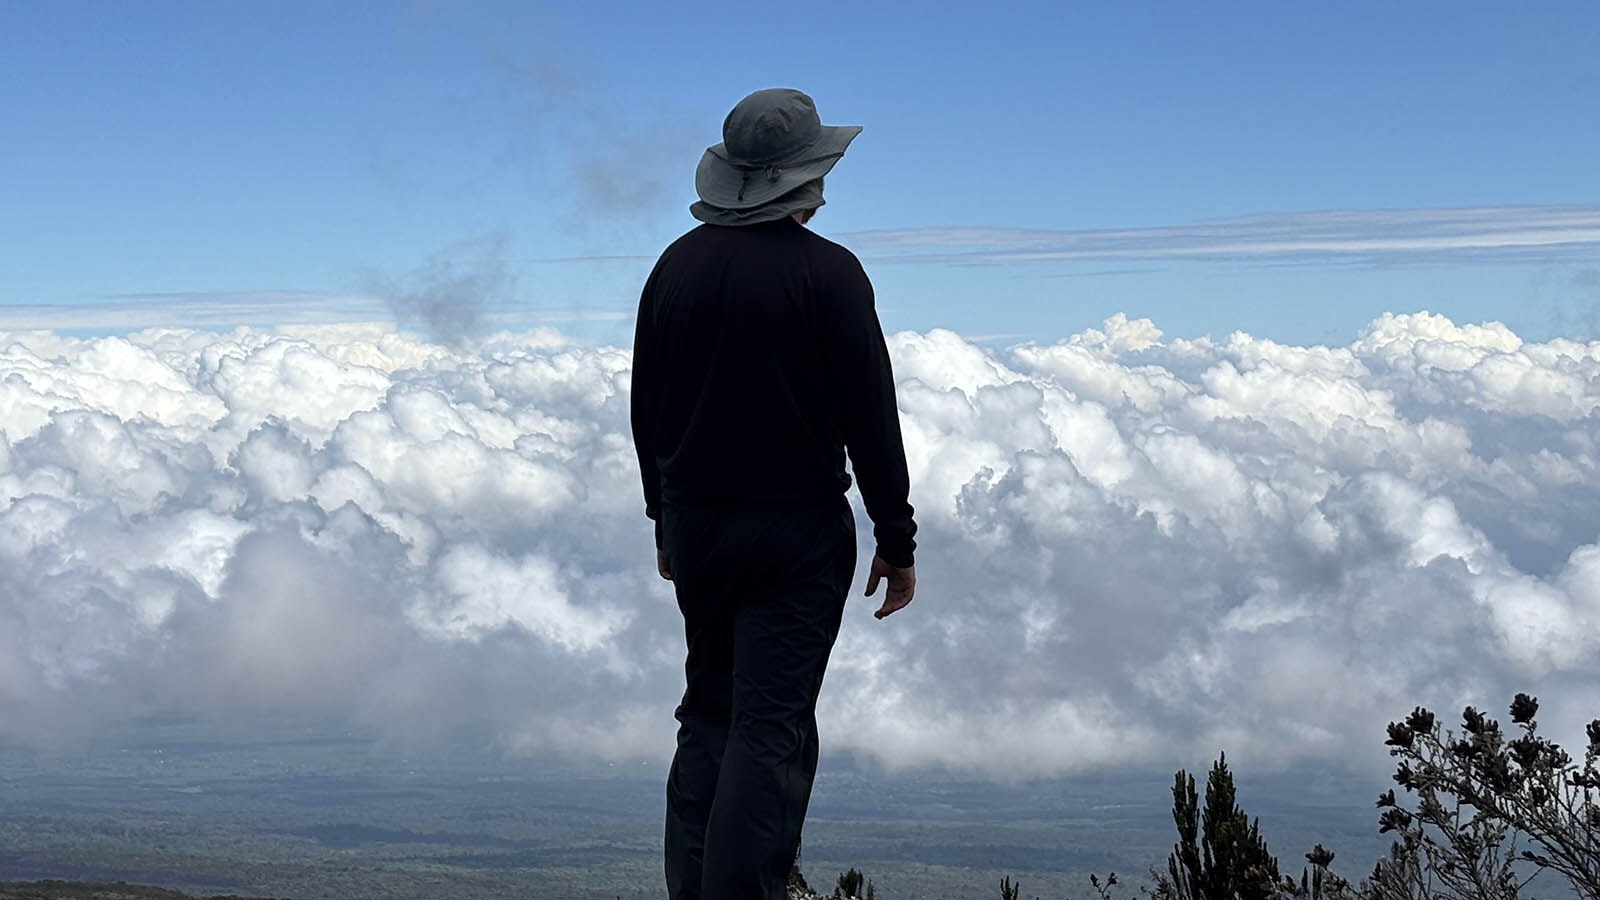 While above the clouds, Chris Clifton is still a long way from the top of Kilimanjaro.